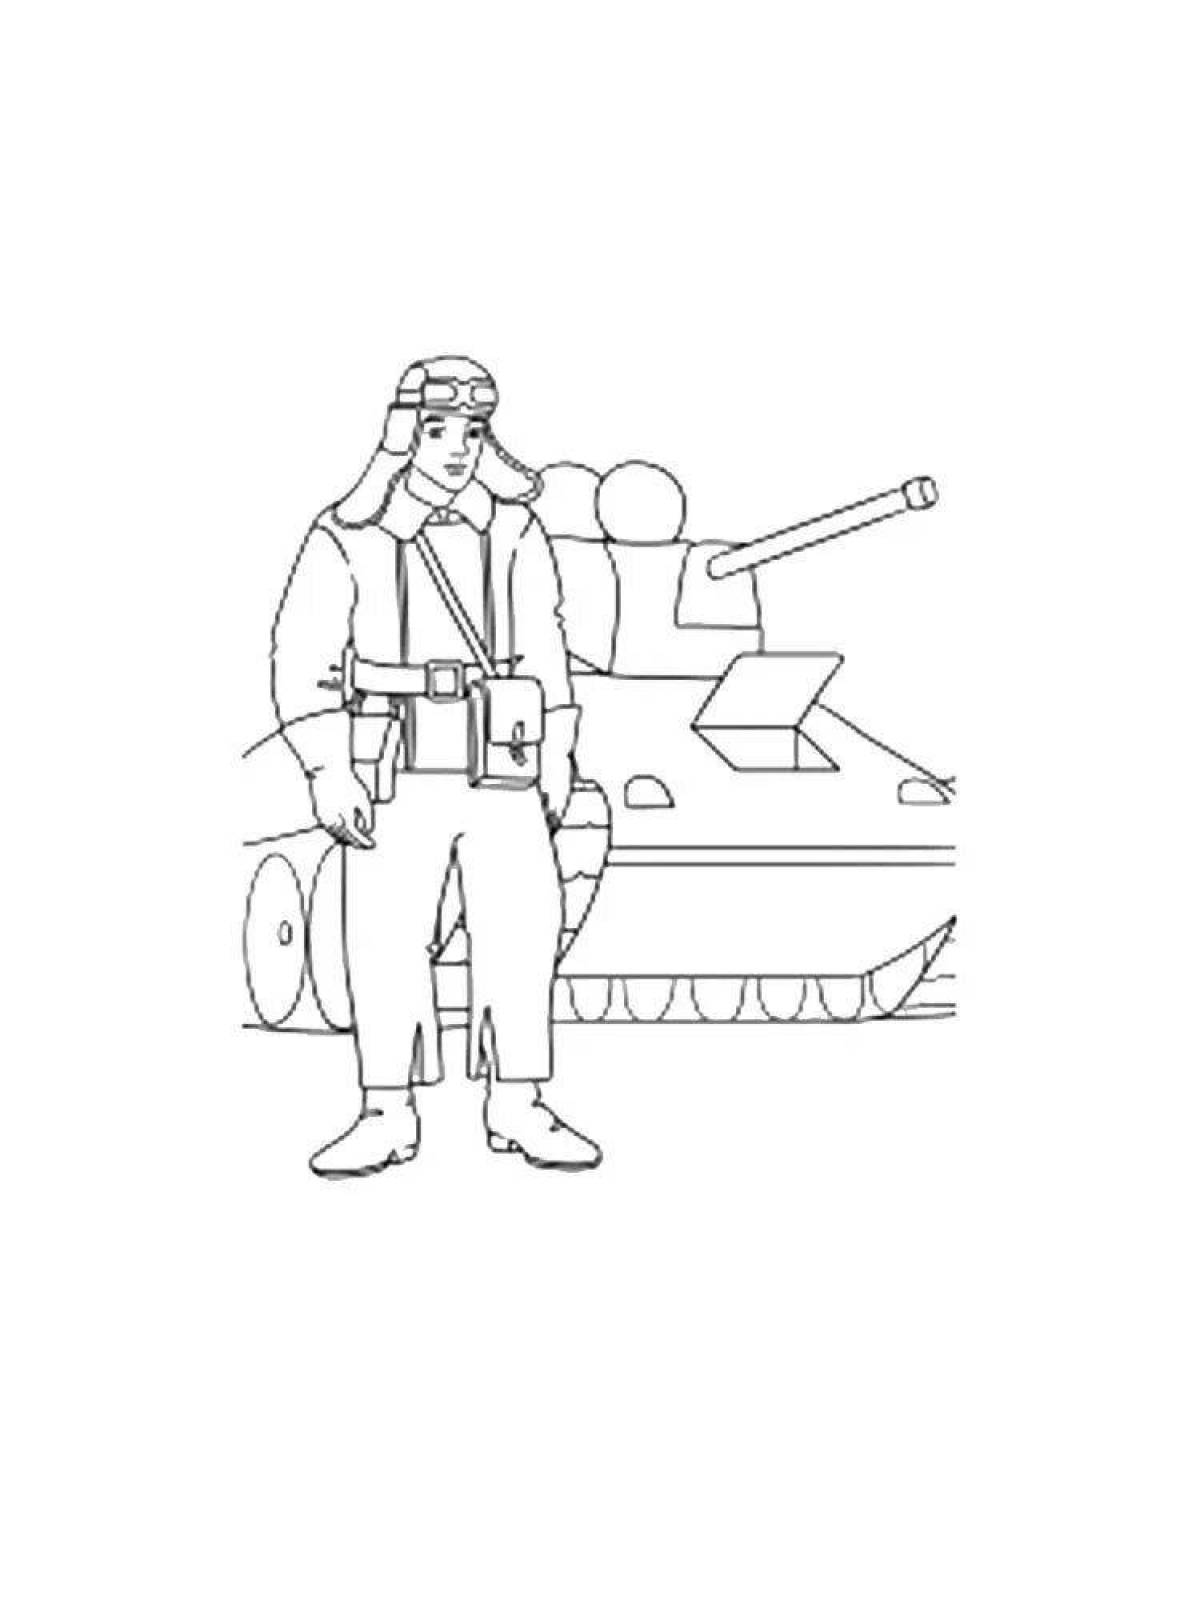 Intriguing military profession coloring book